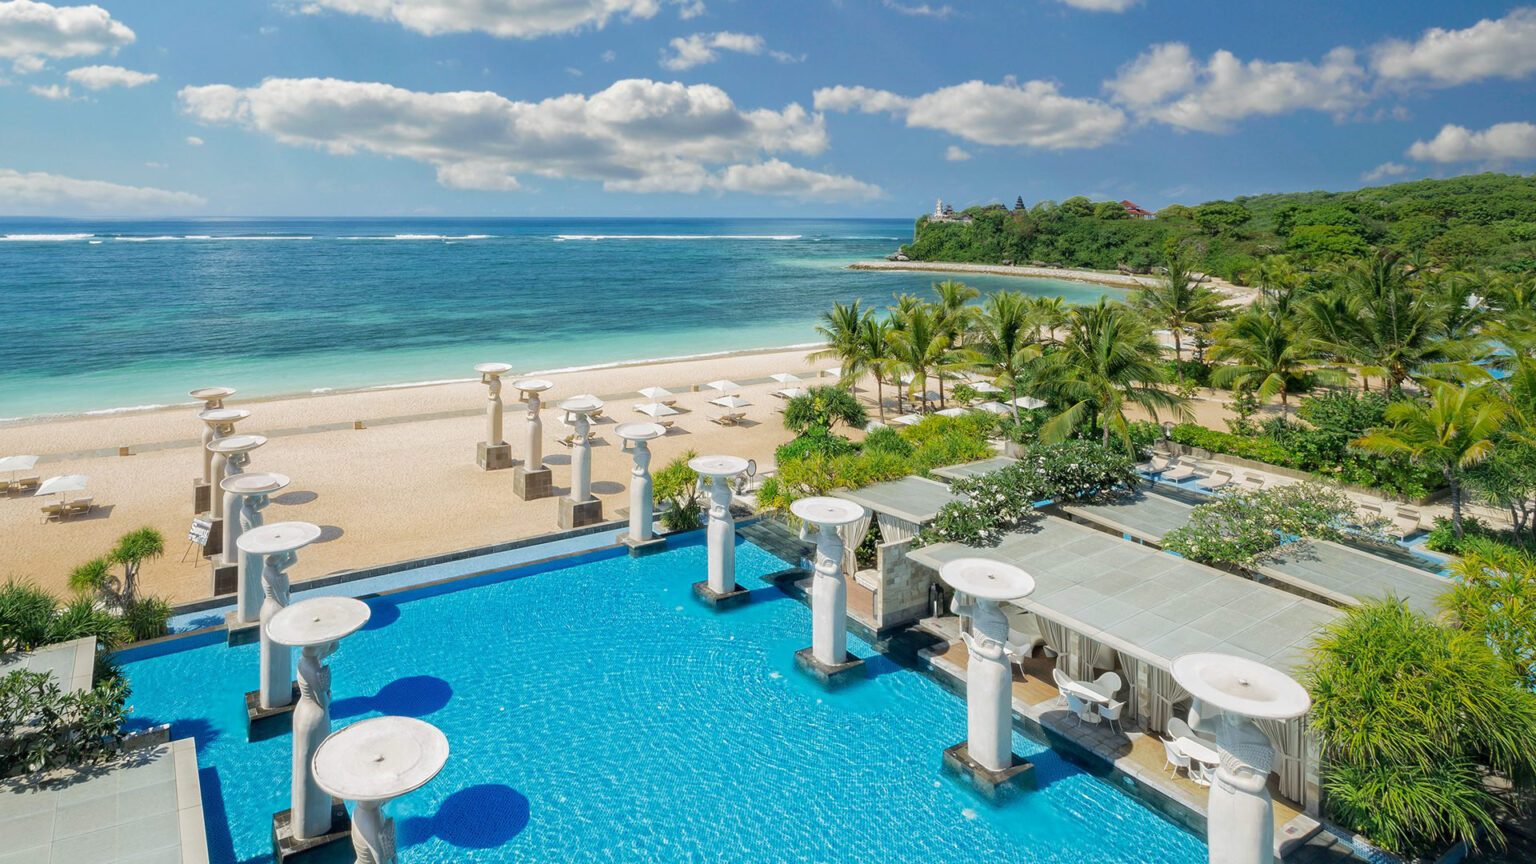 View of the Oasis pool looking out over the beach and ocean at The Mulia - Luxury Escapes